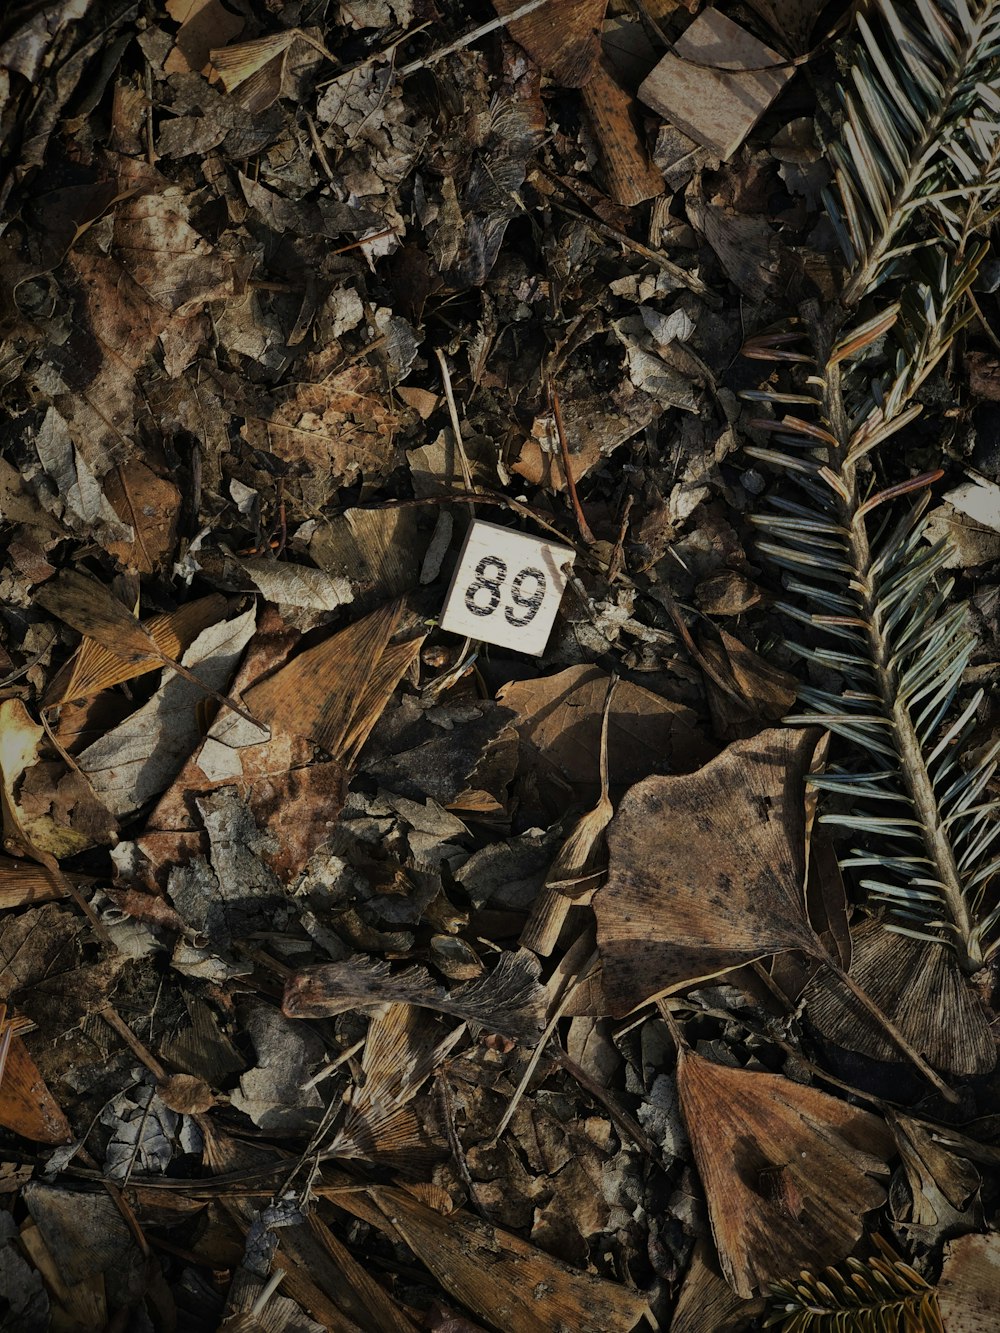 a close up of a number on a pile of leaves